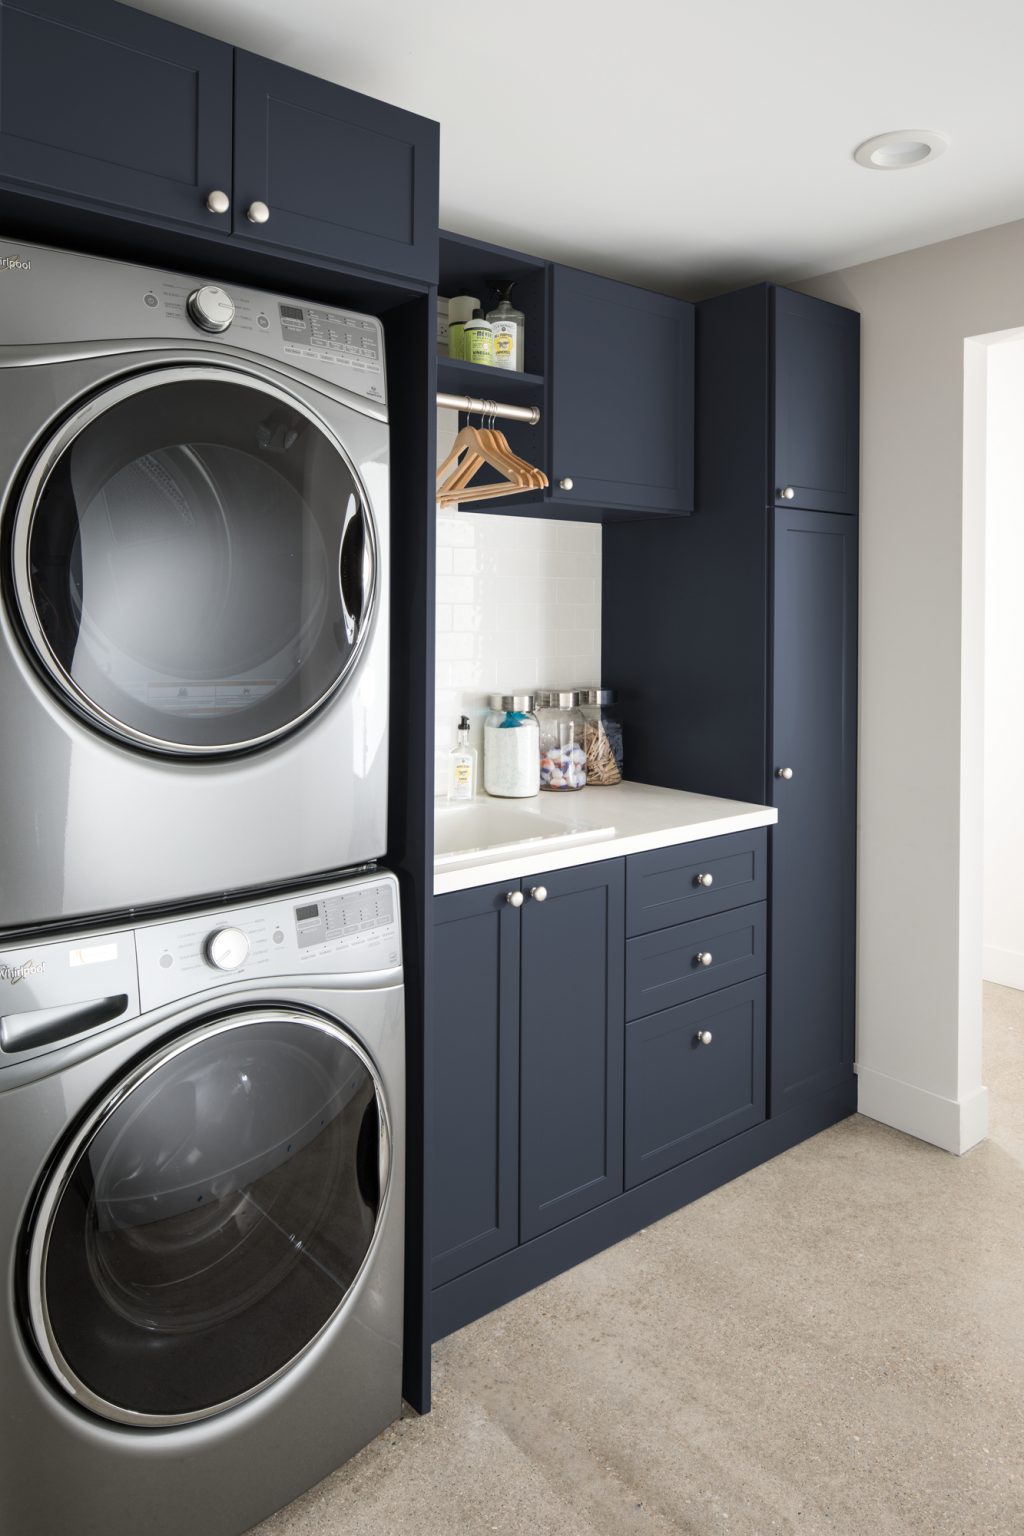 Laundry Room Storage & Cabinet Solutions | Inspired Closets